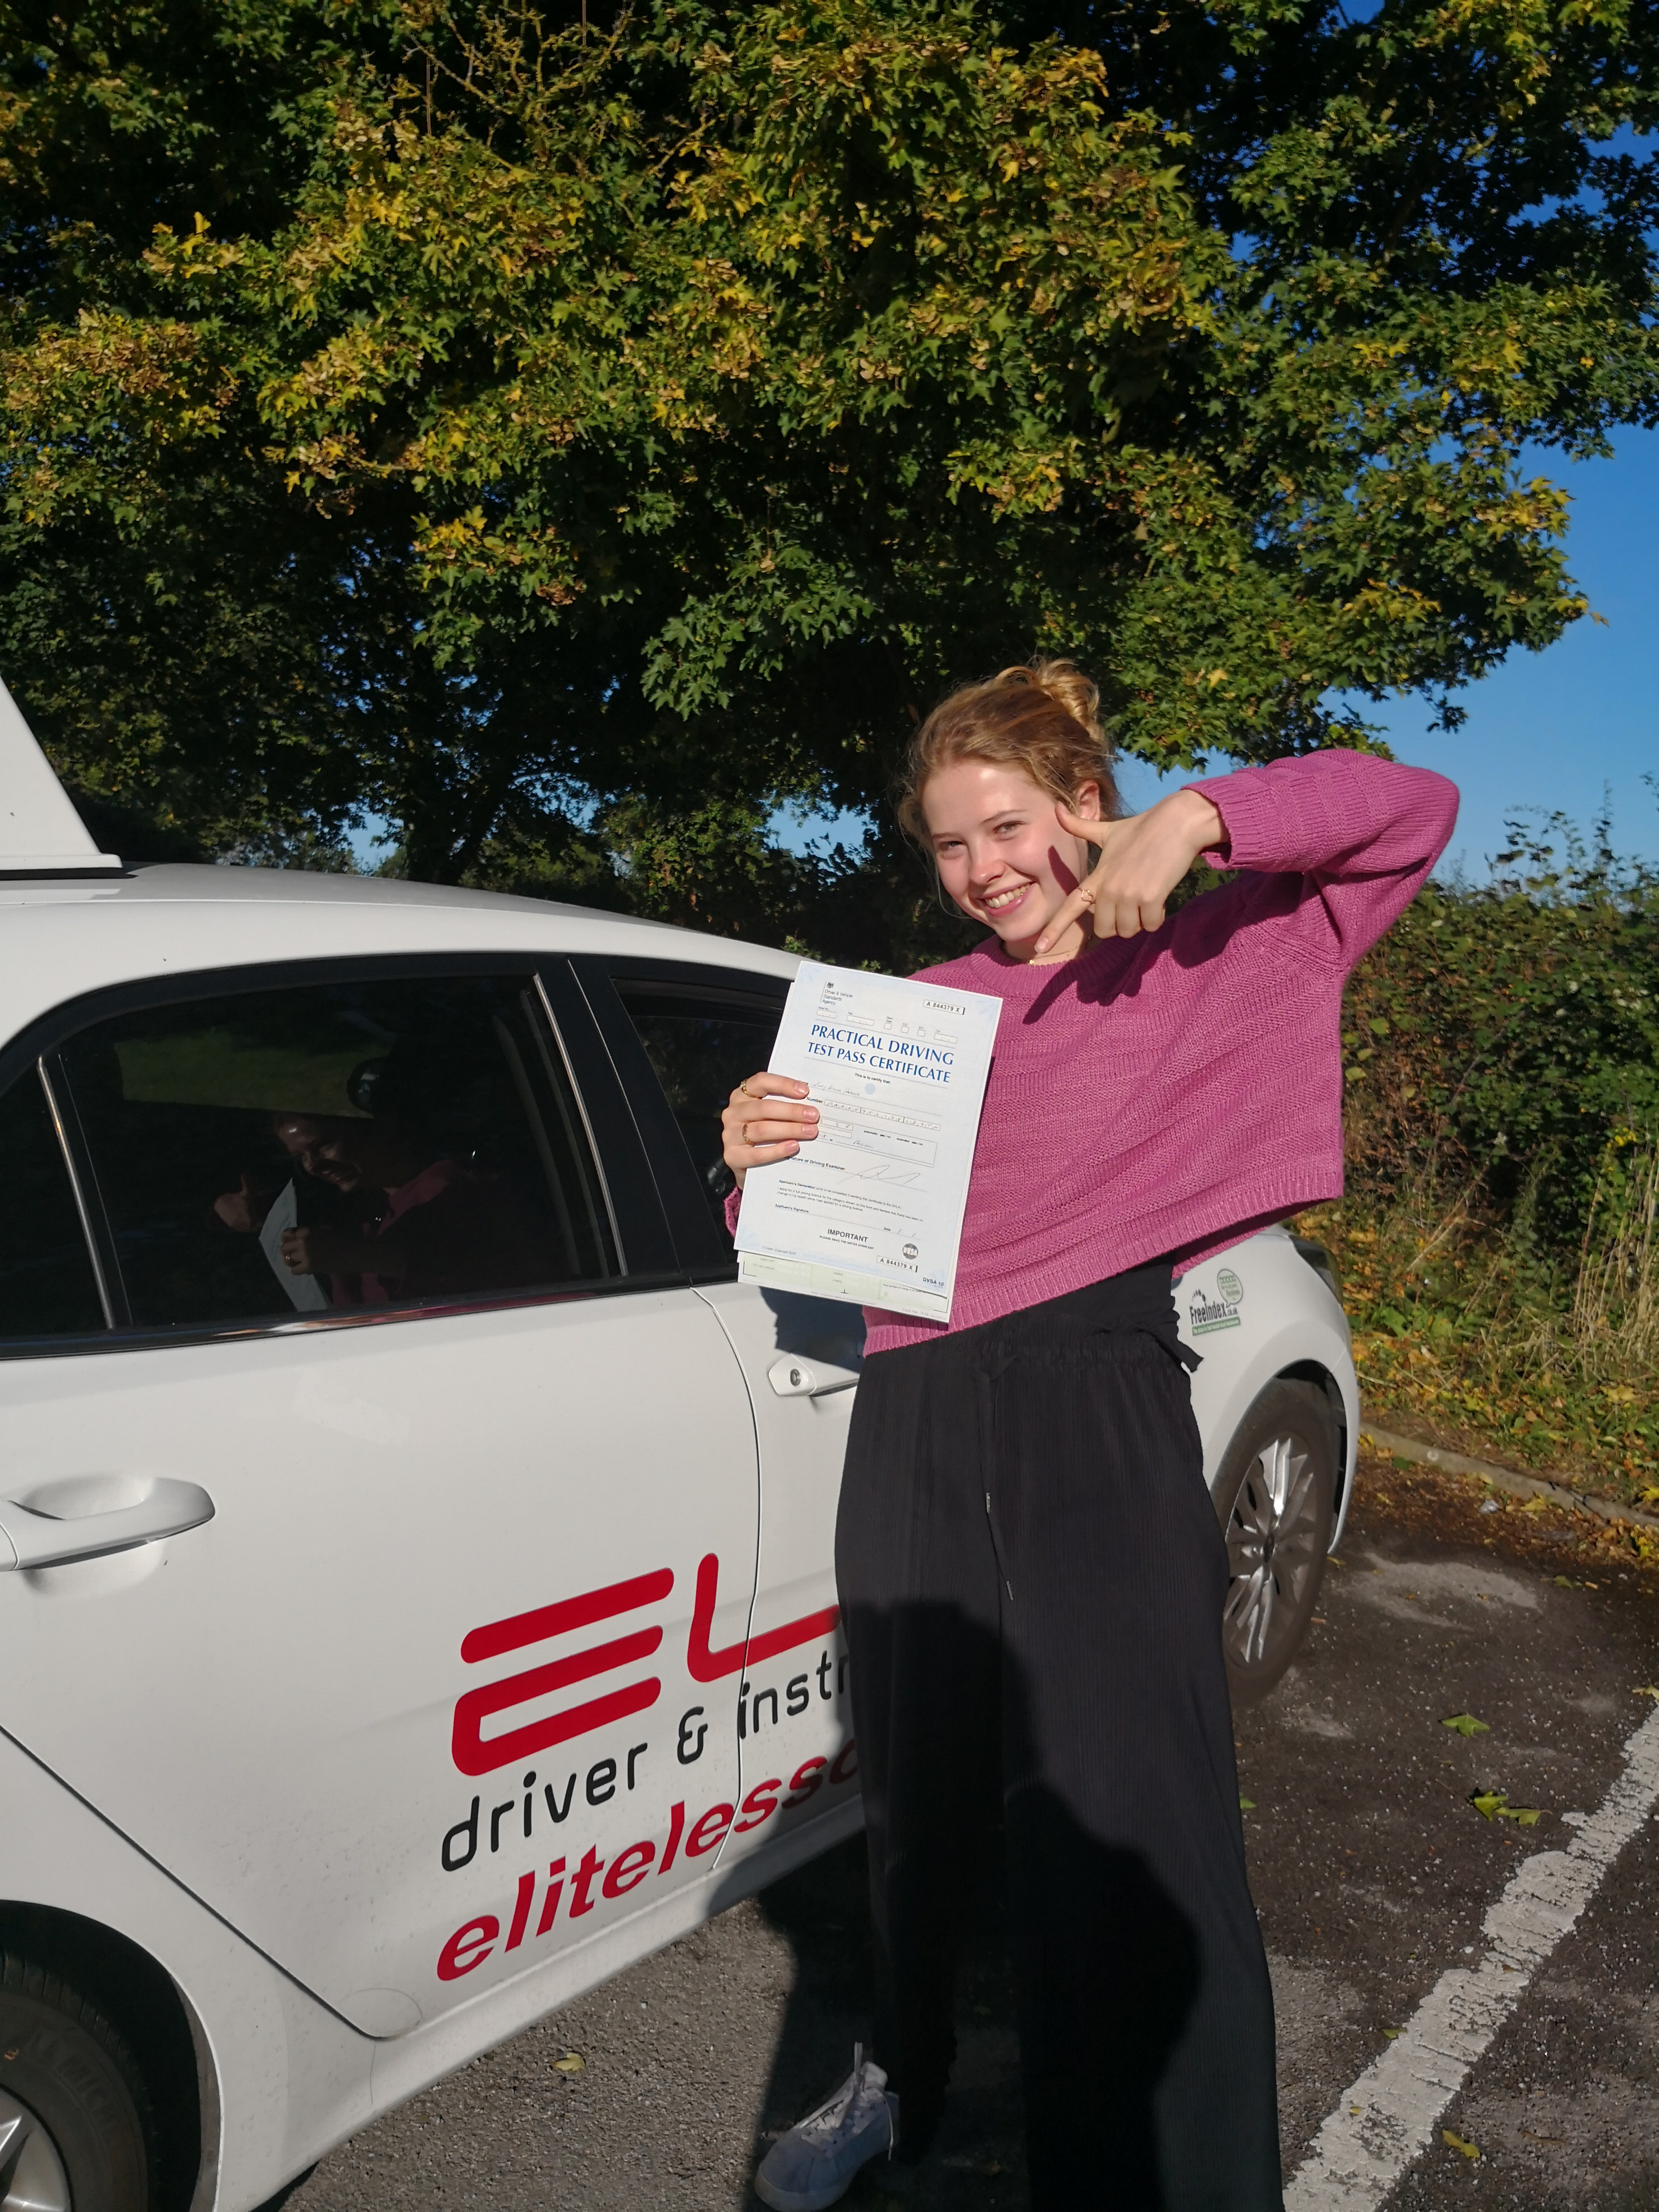 Well done to Jenny's pupil Lucy for her #firsttimepass at #Redhill yesterday! #newdriver #independence #drivinglessons